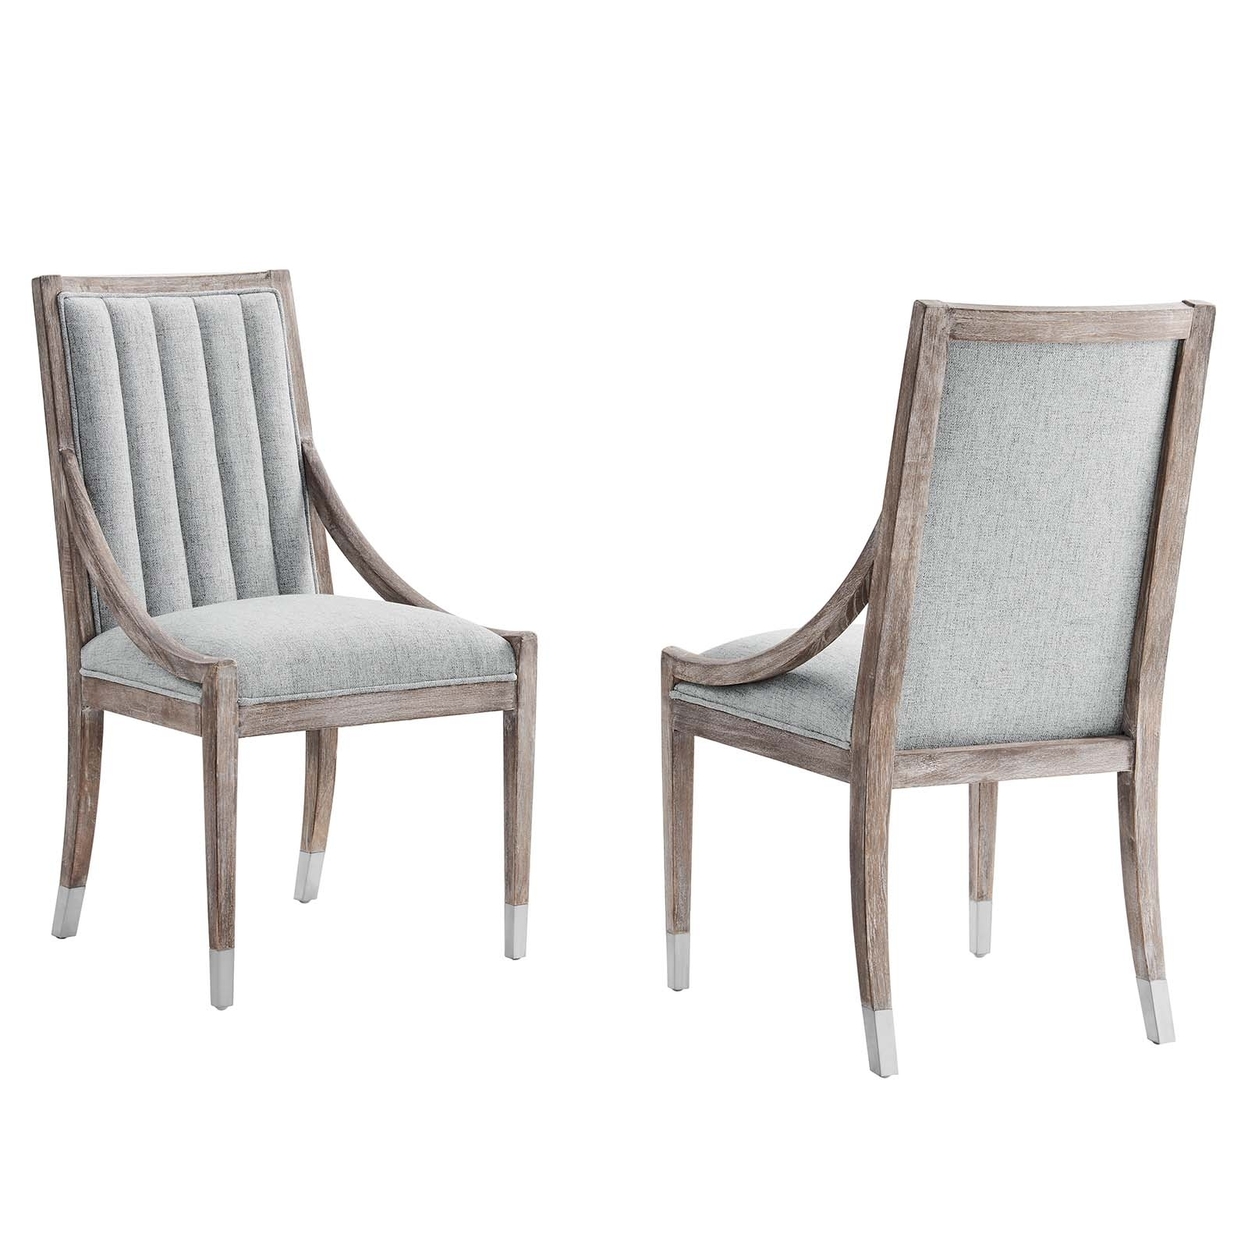 Maison French Vintage Tufted Fabric Dining Armchairs Set Of 2, Light Gray